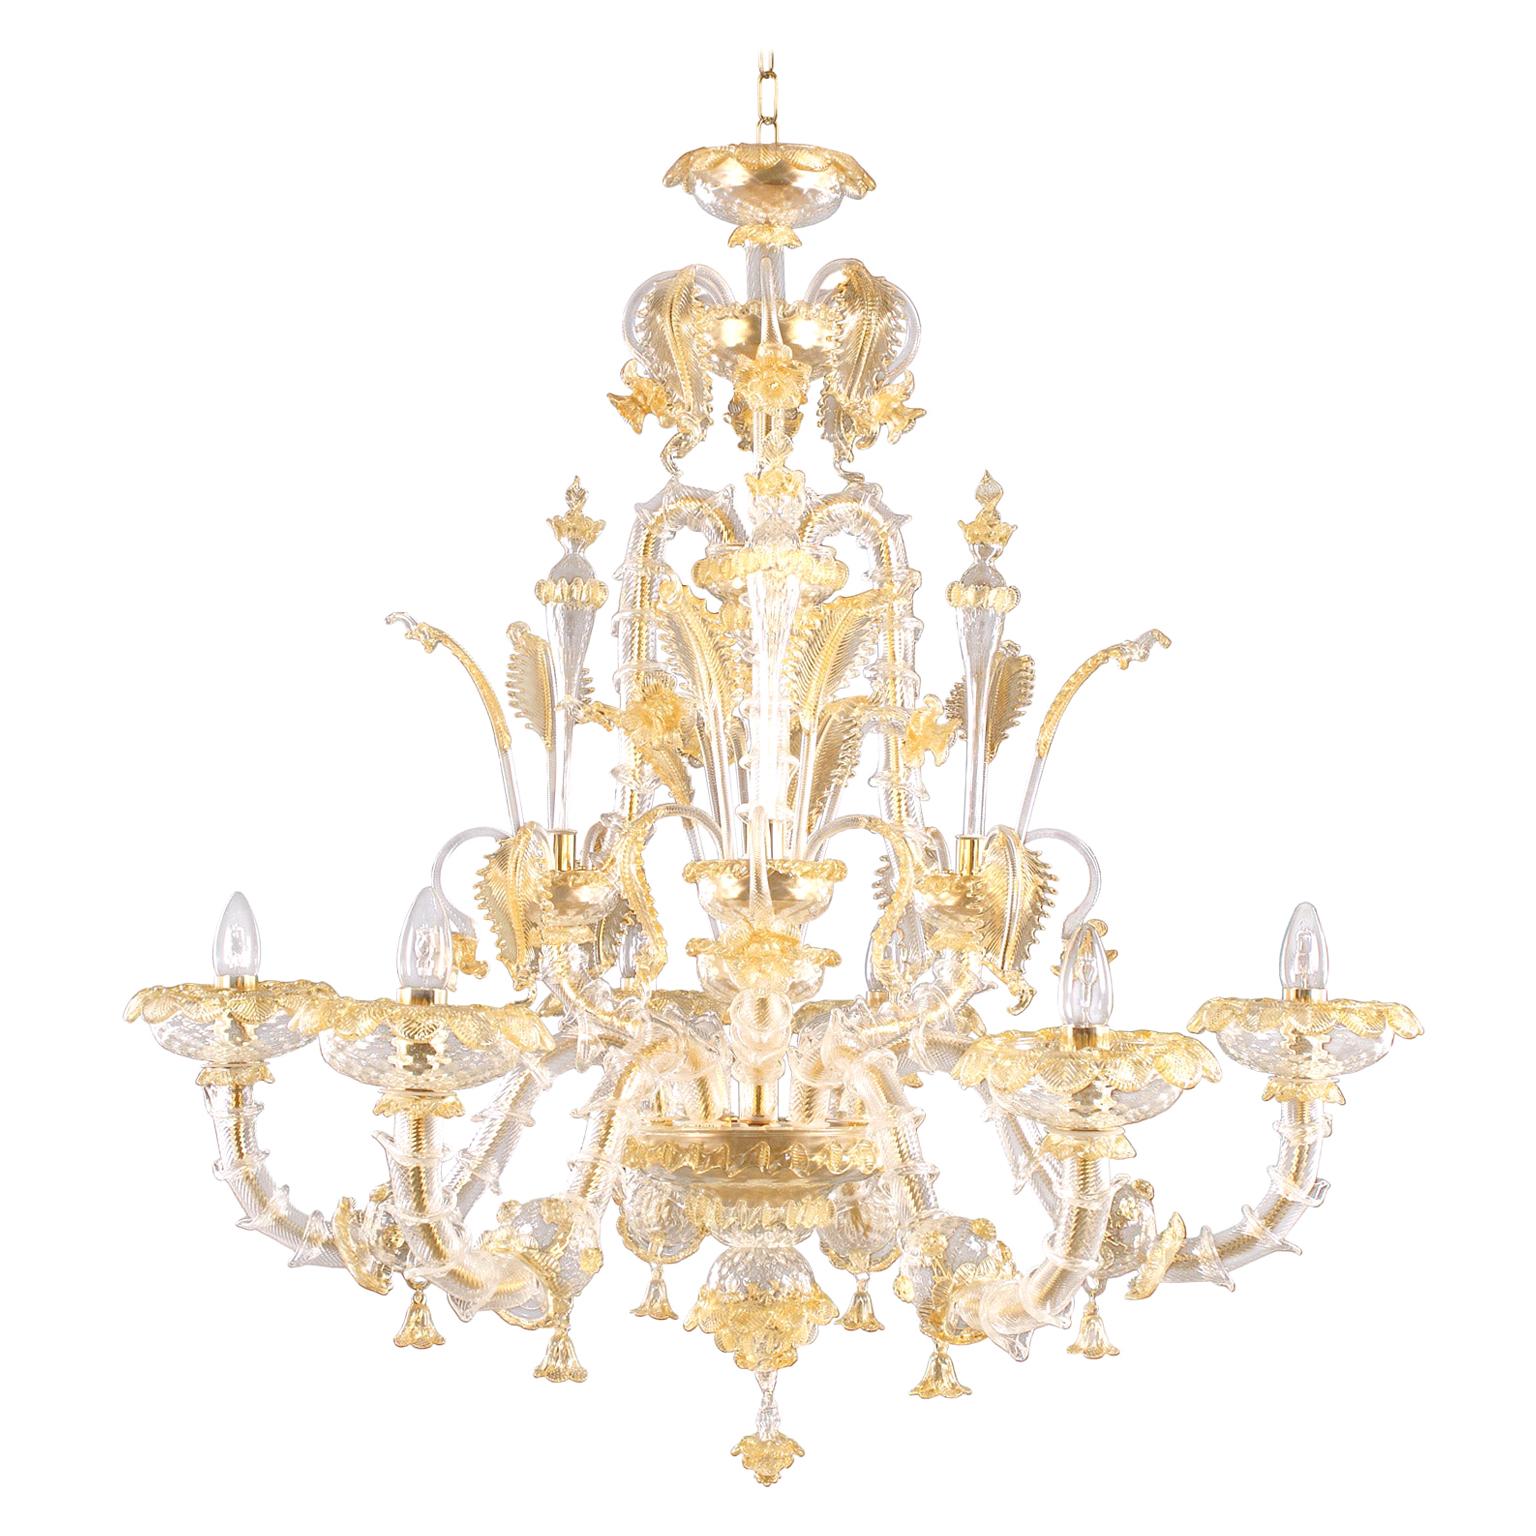 Rezzonico Chandelier 6 arms Crystal Amber Murano Glass Caesar by Multiforme